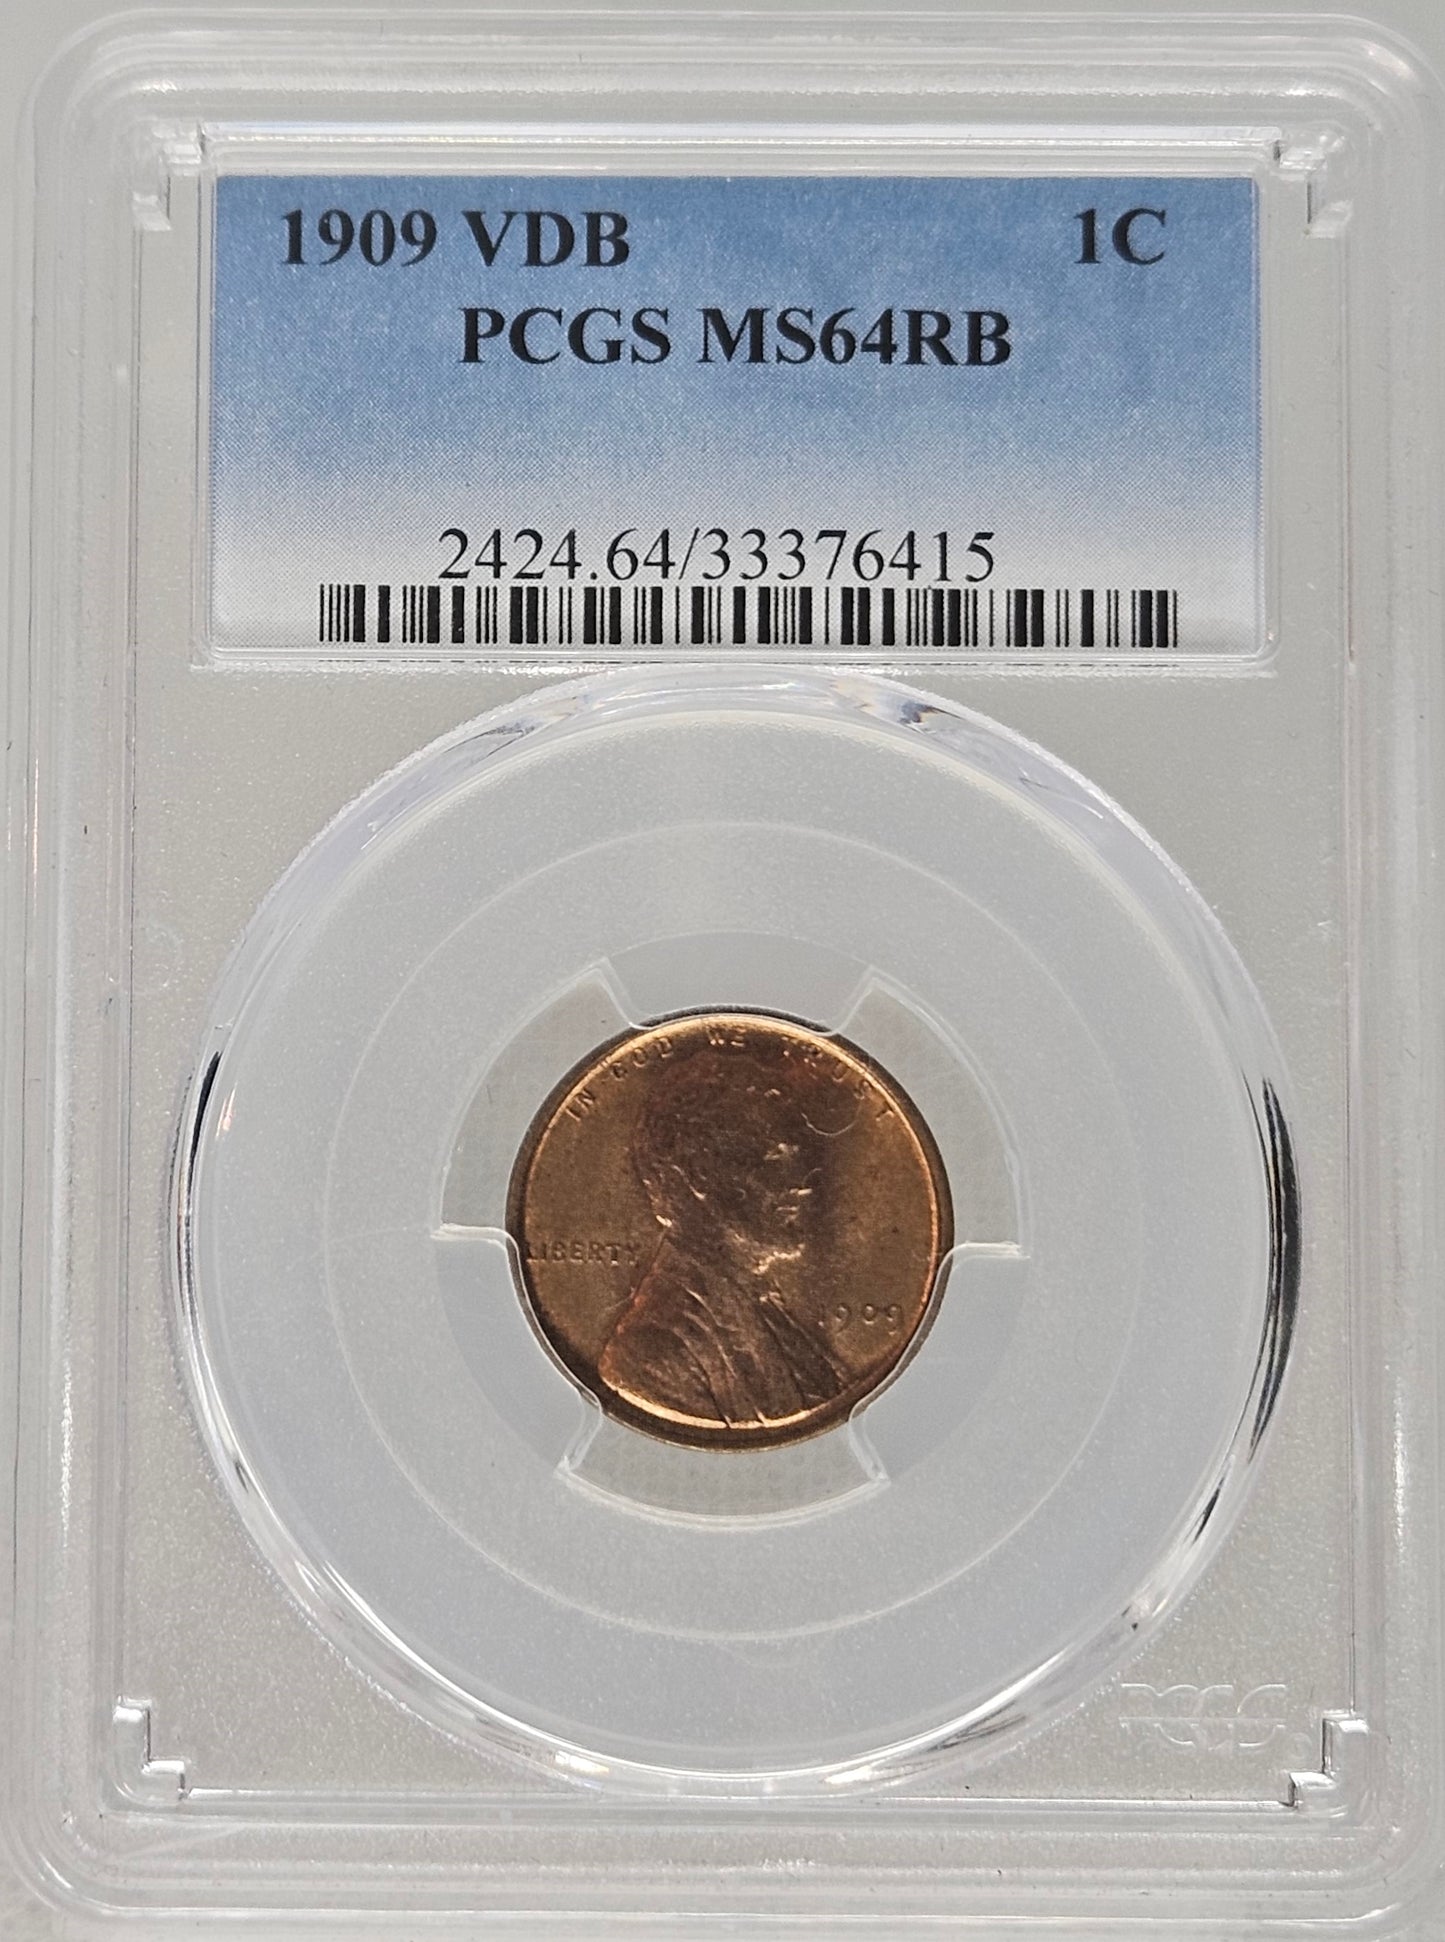 1909-VDB Lincoln Wheat Cent PCGS MS 64 RB  Highly Desireable VDB Cent!!!